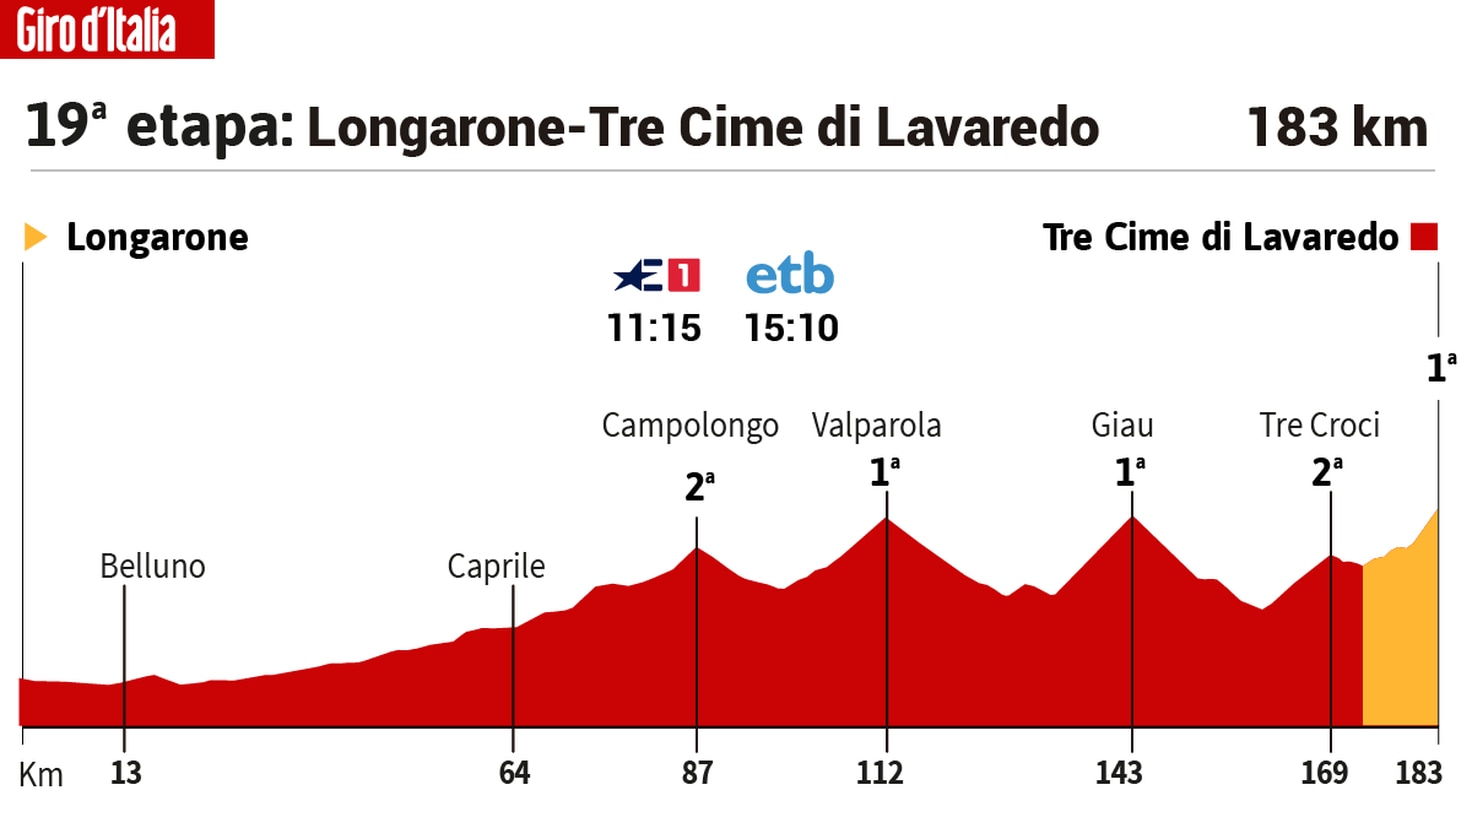 Giro d'Italia today, stage 19: schedule, profile and route
